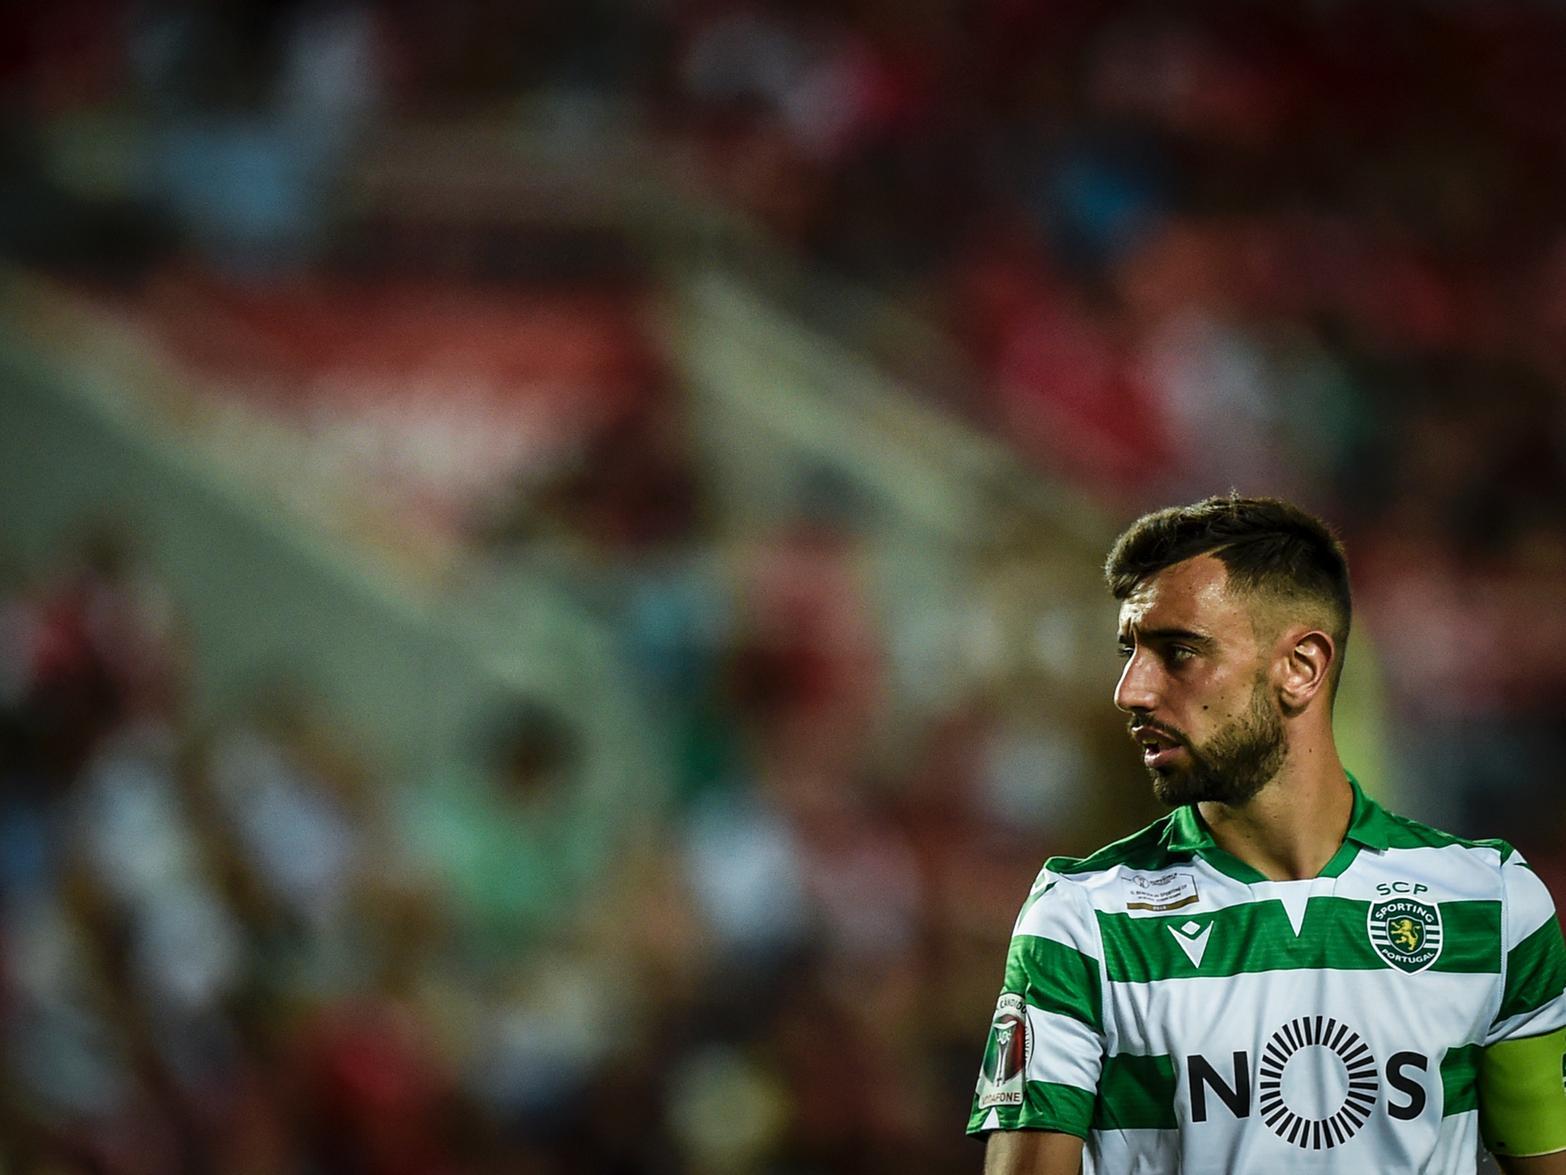 Manchester United reportedly need to hold more talks with Sporting Lisbon after failing to agree a fee for Bruno Fernandes. (Metro)